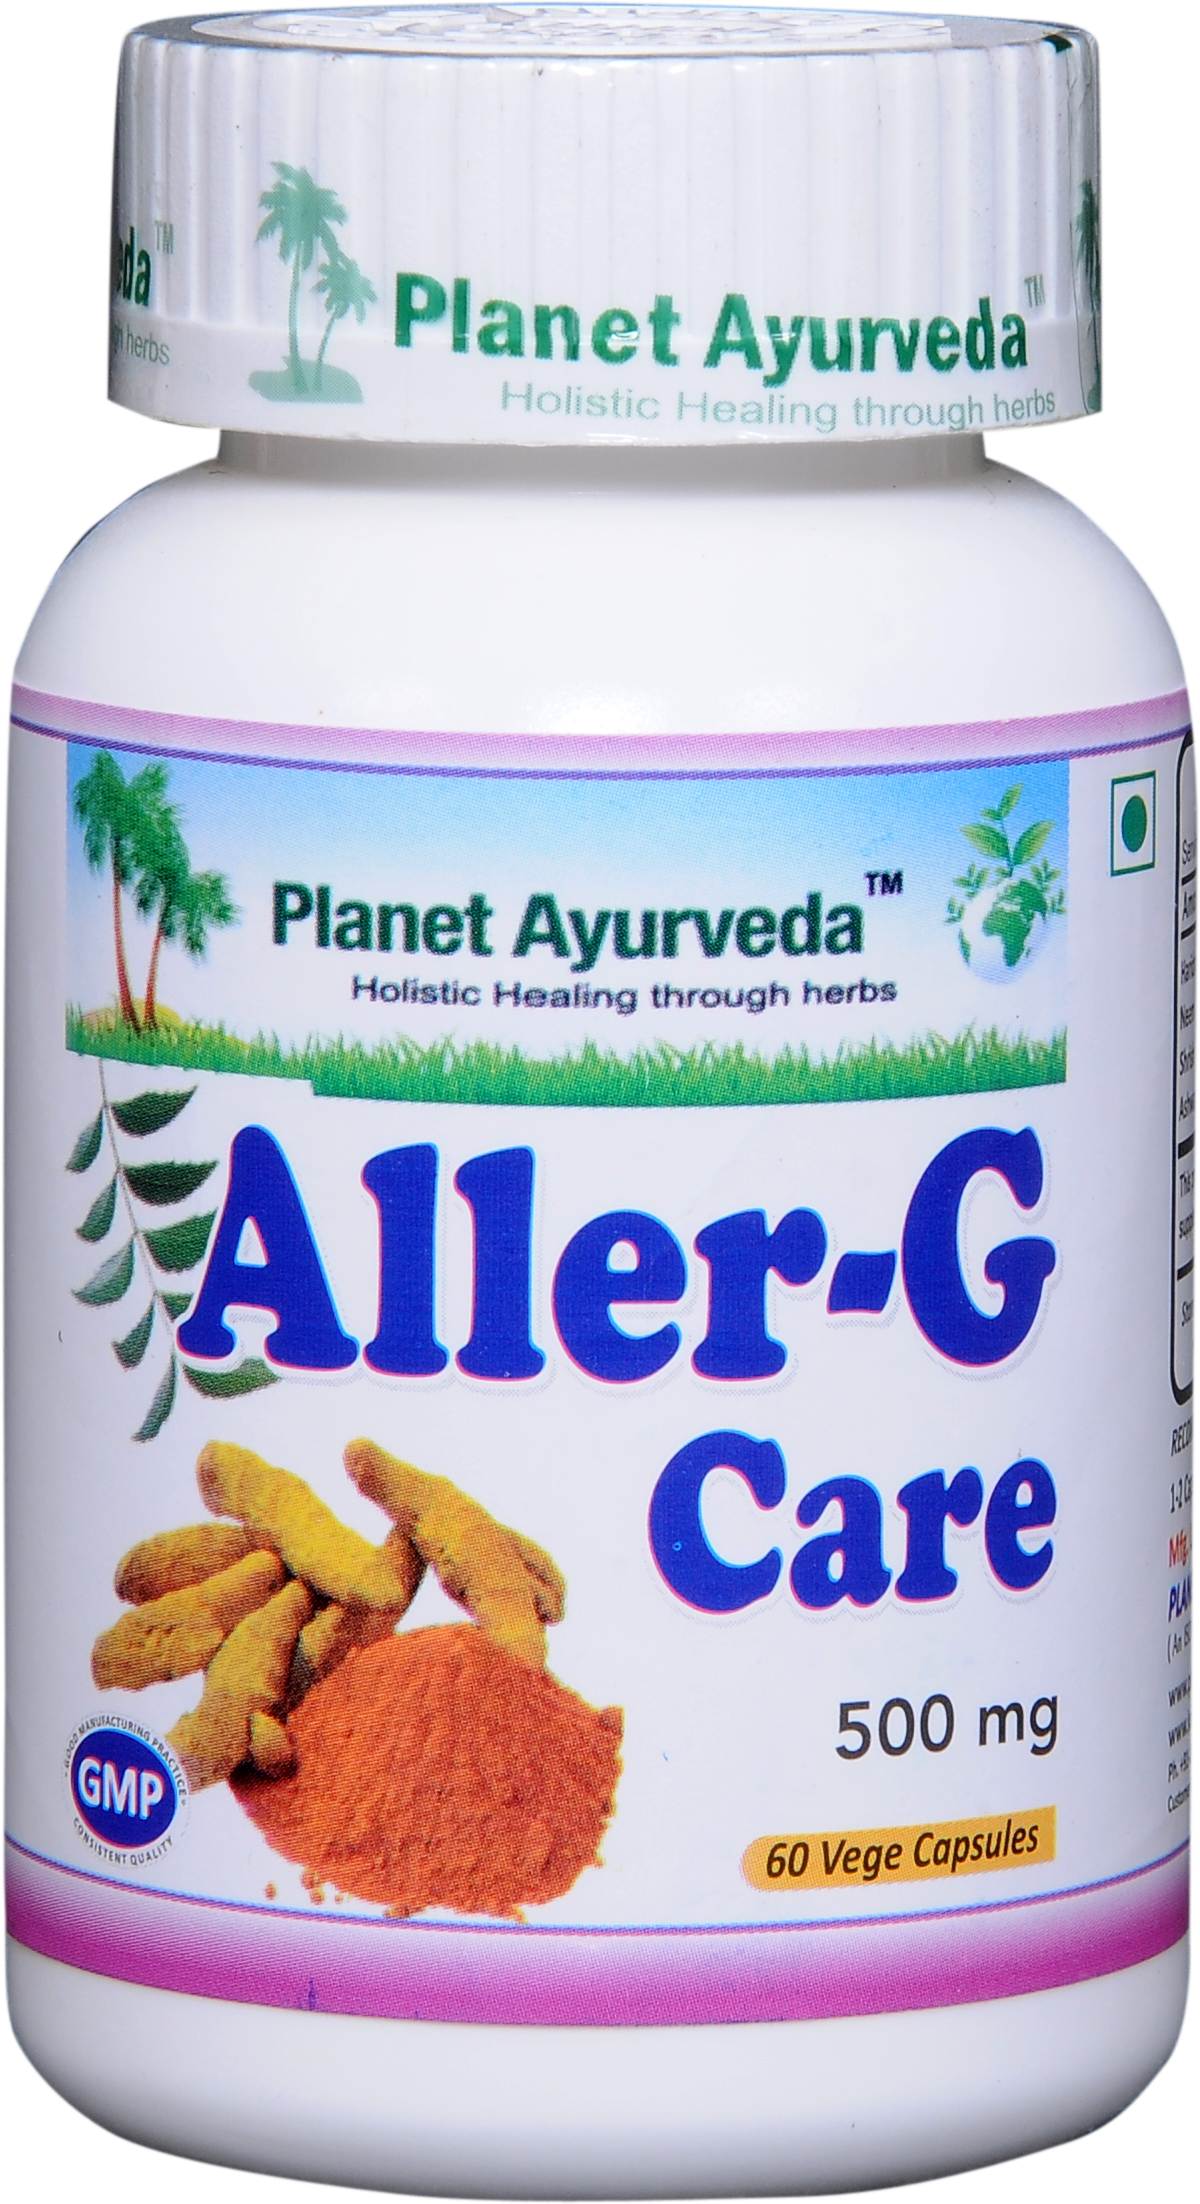 ALLERG CARE - alergie a astme